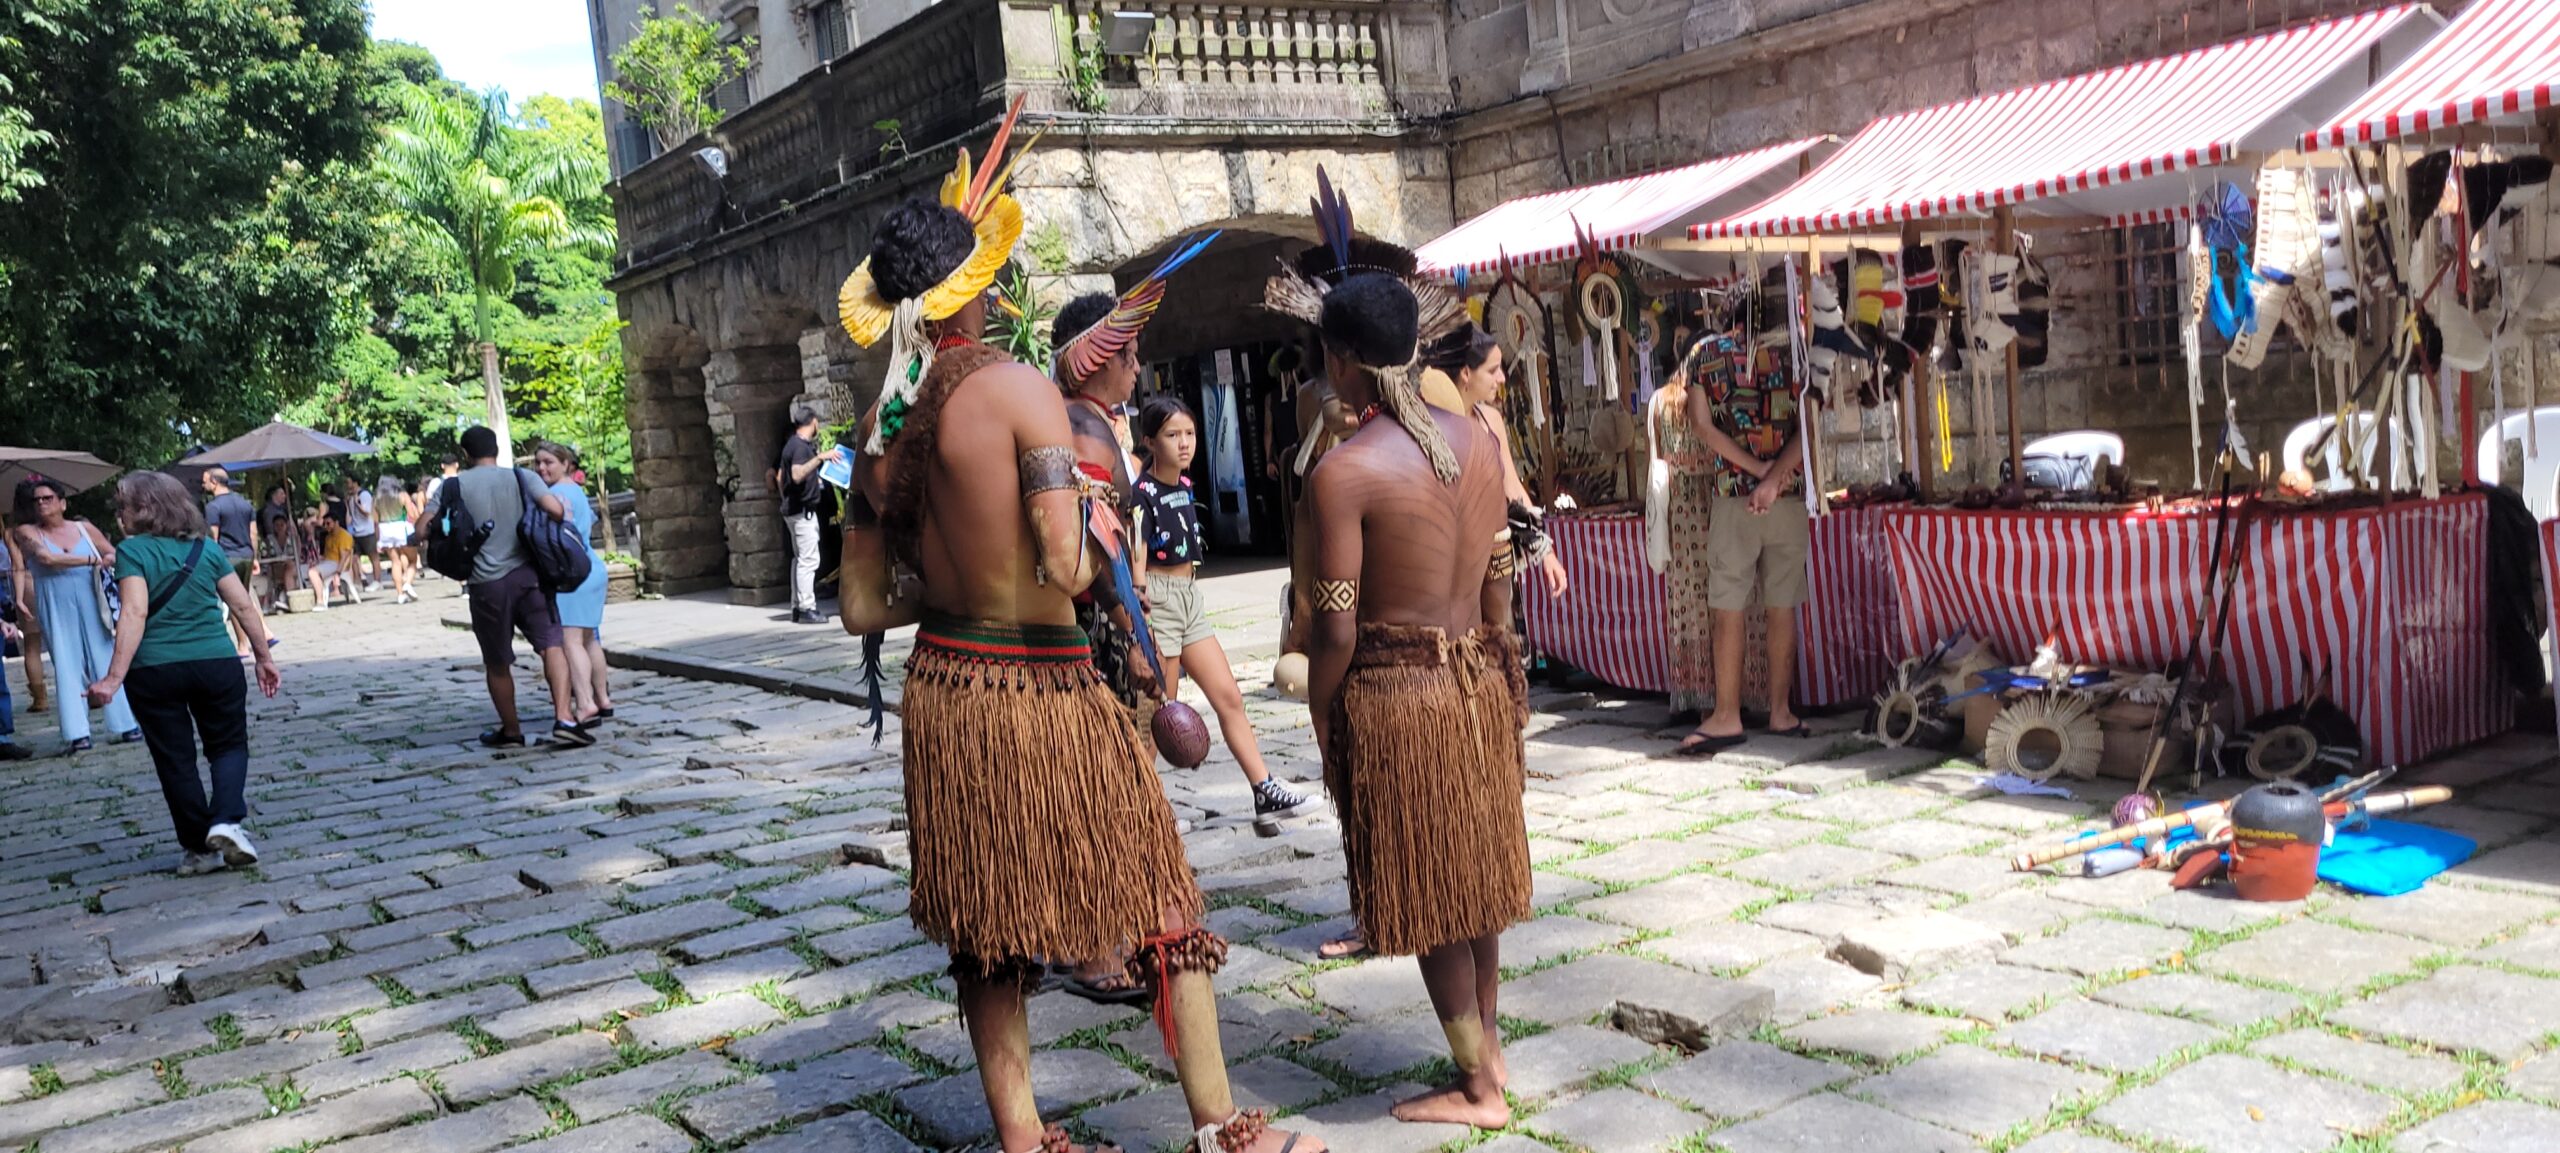 Living tradition: Fair in Rio de Janeiro honors indigenous culture